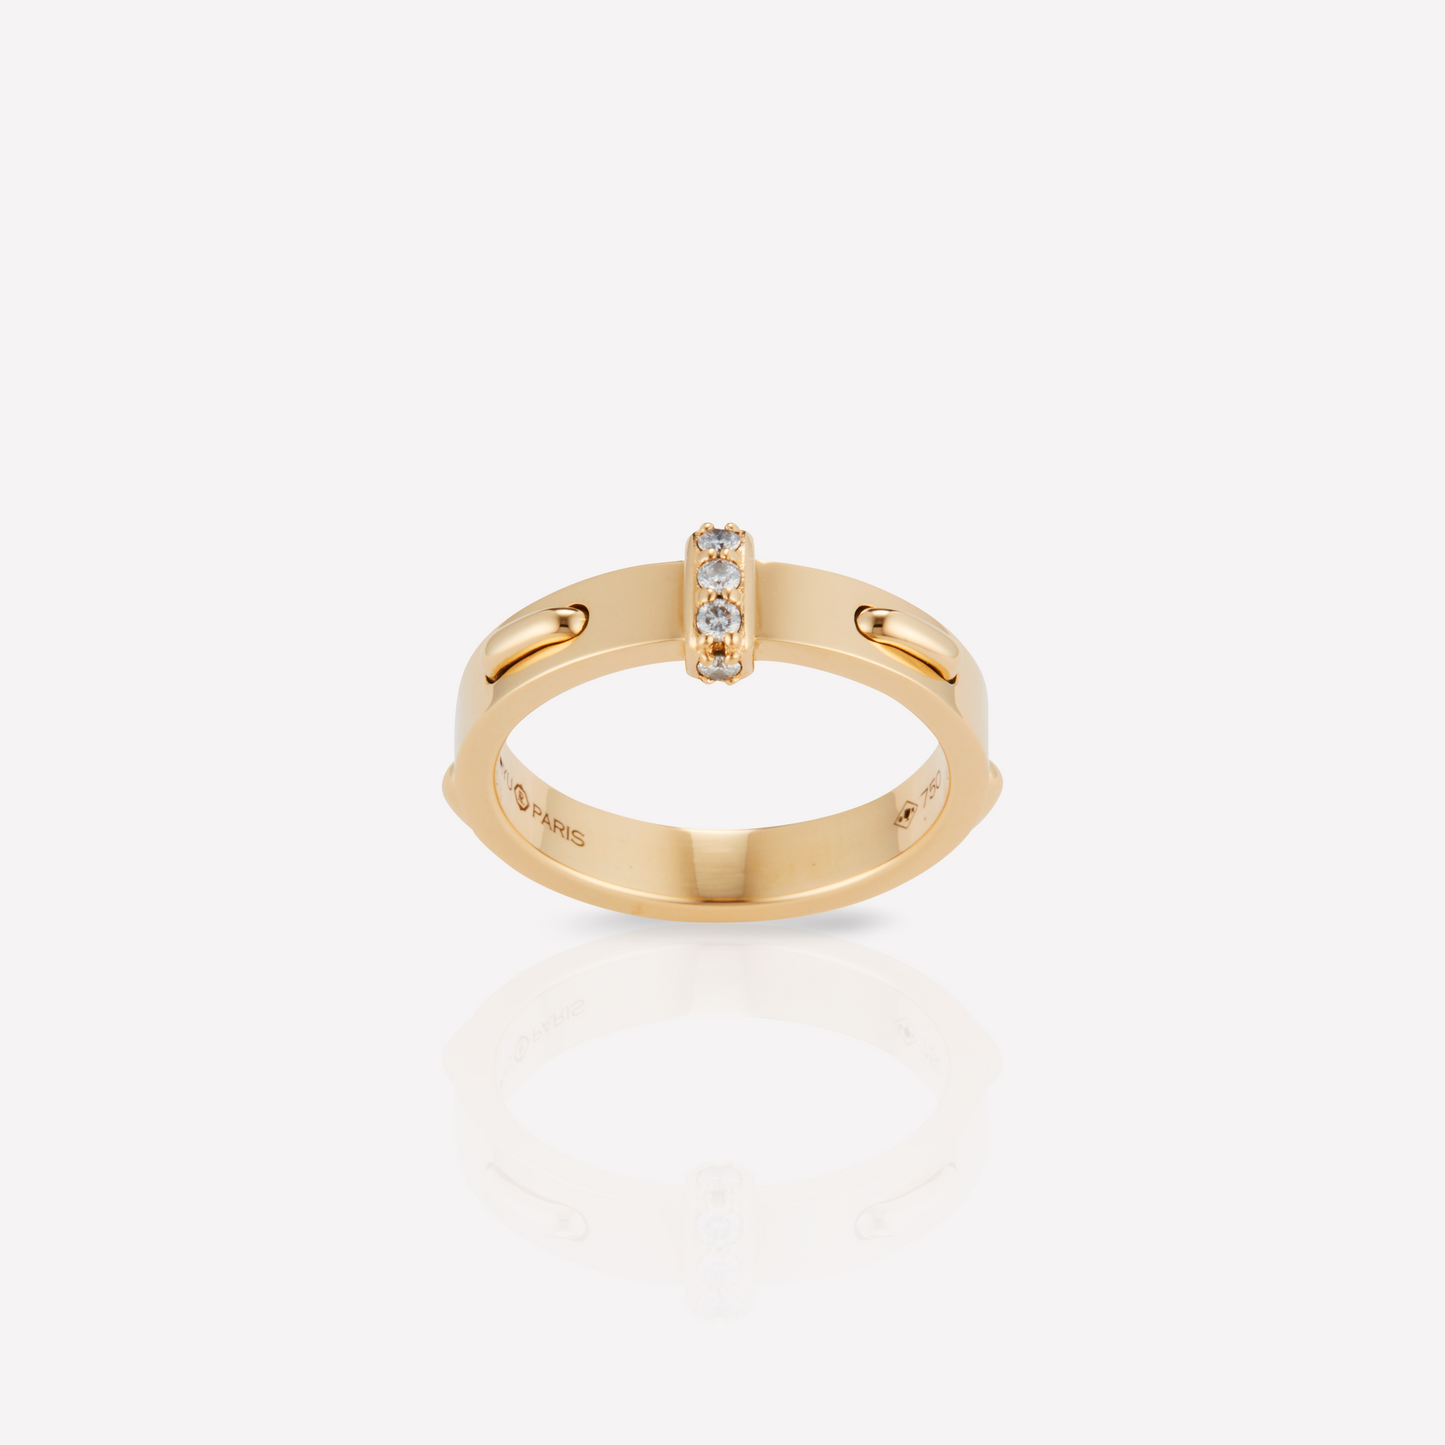 Twined 4,0 Bague, Diamant Bande